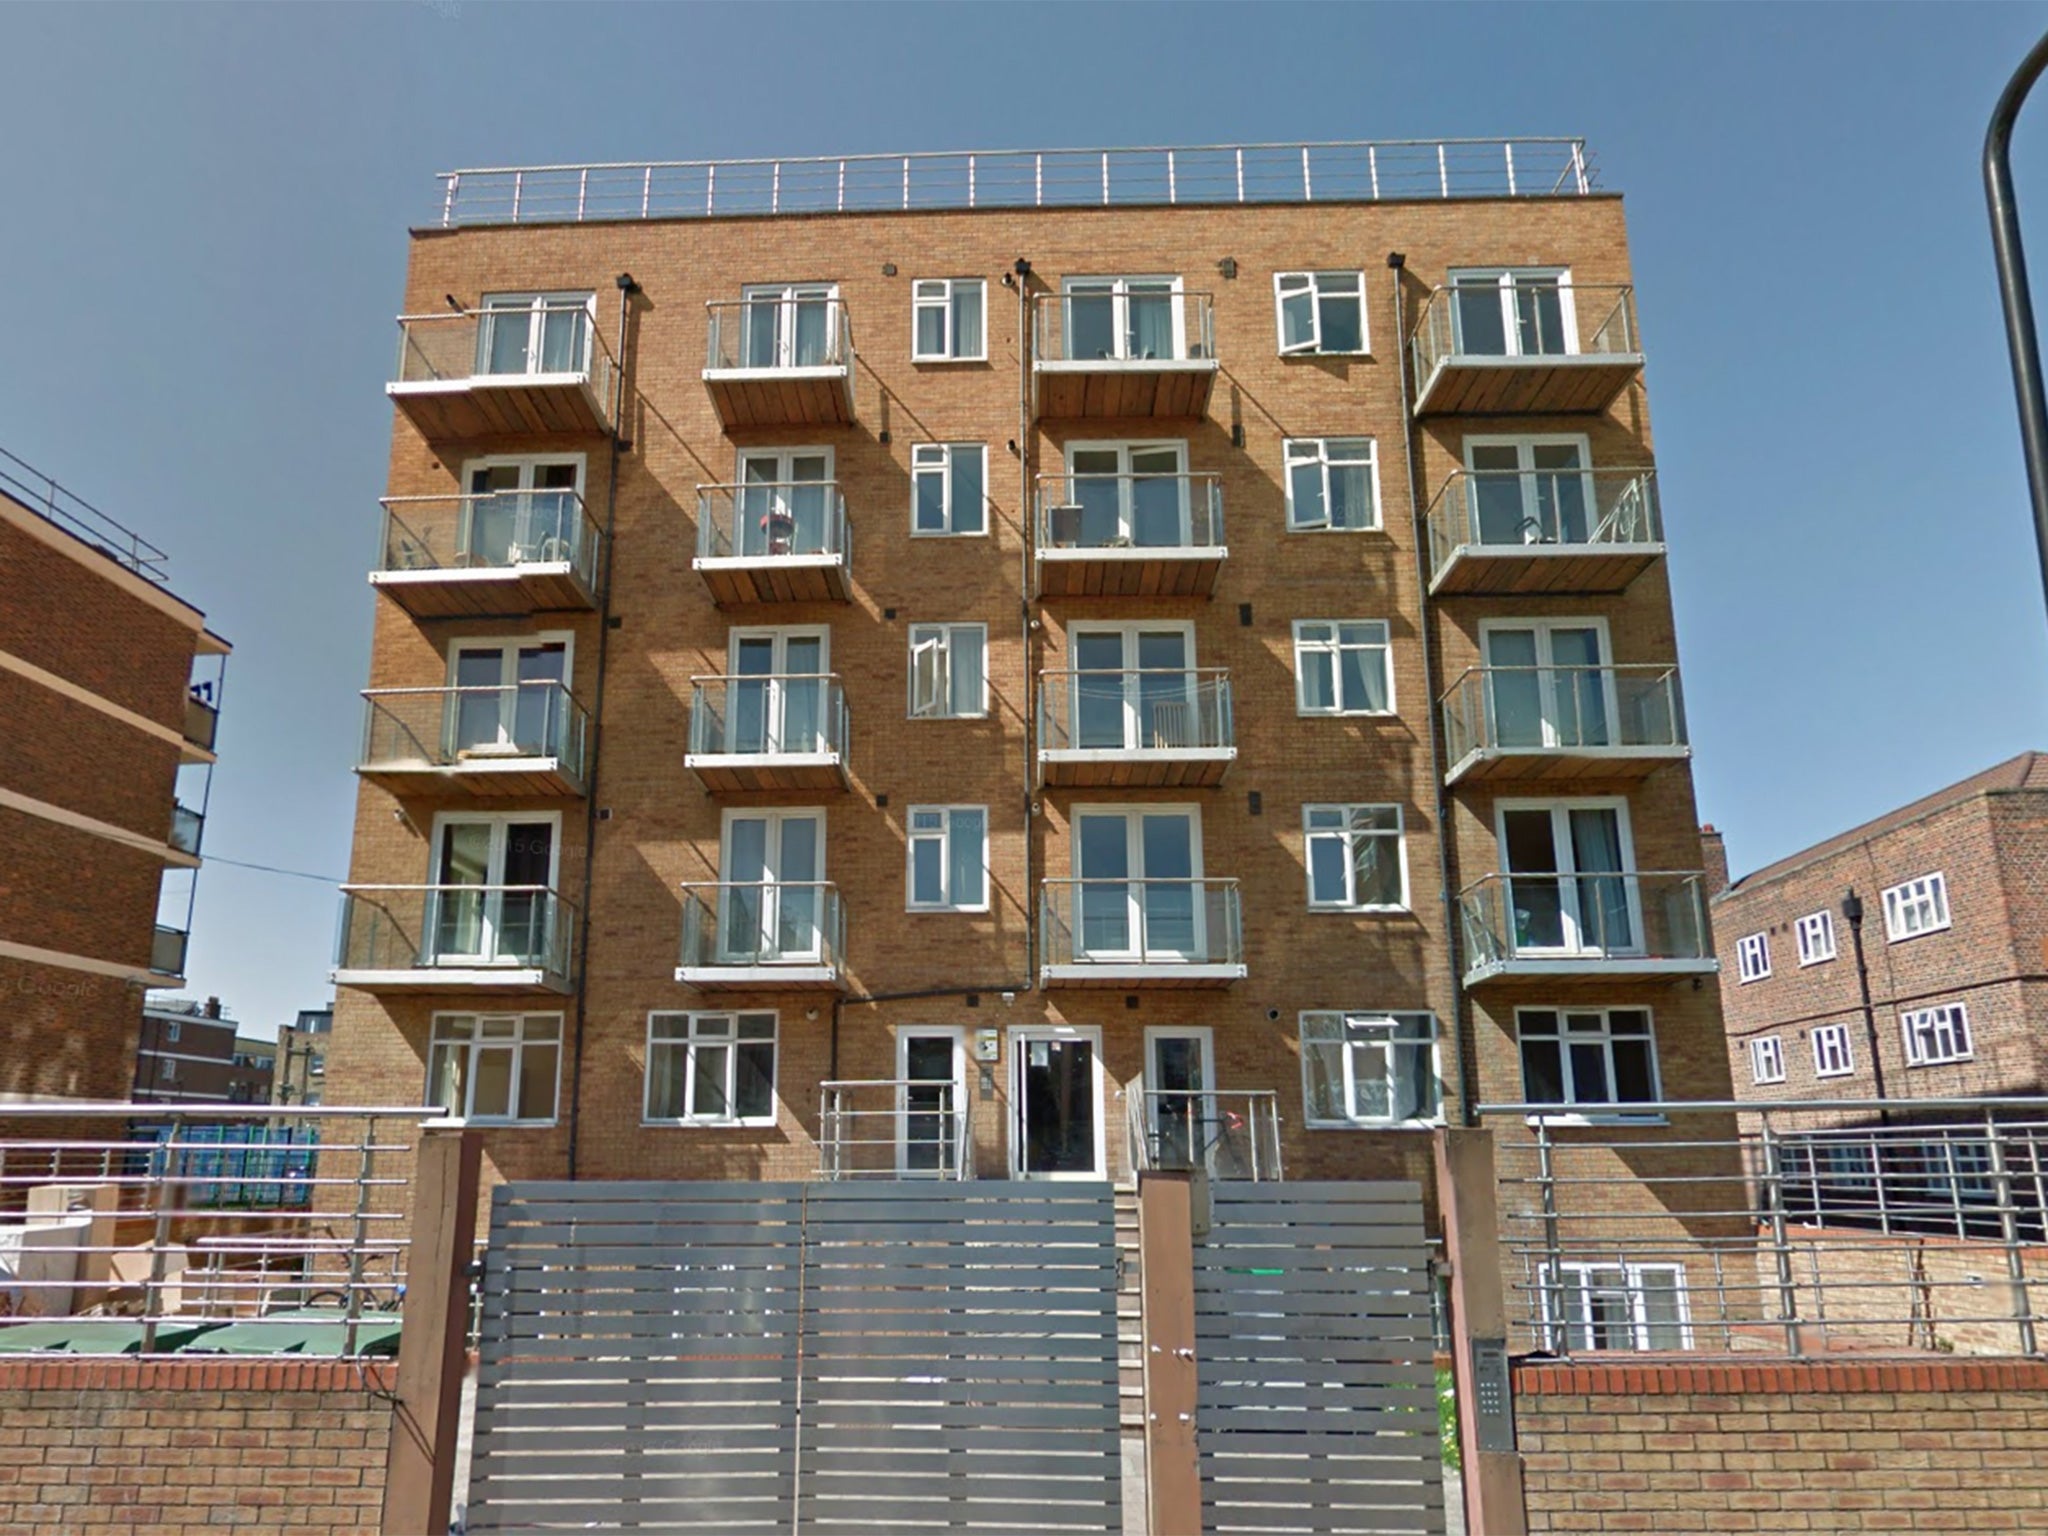 Yusuf Sarodia was first ordered to remove the flats, which were built with no planning permission, back in August 2011